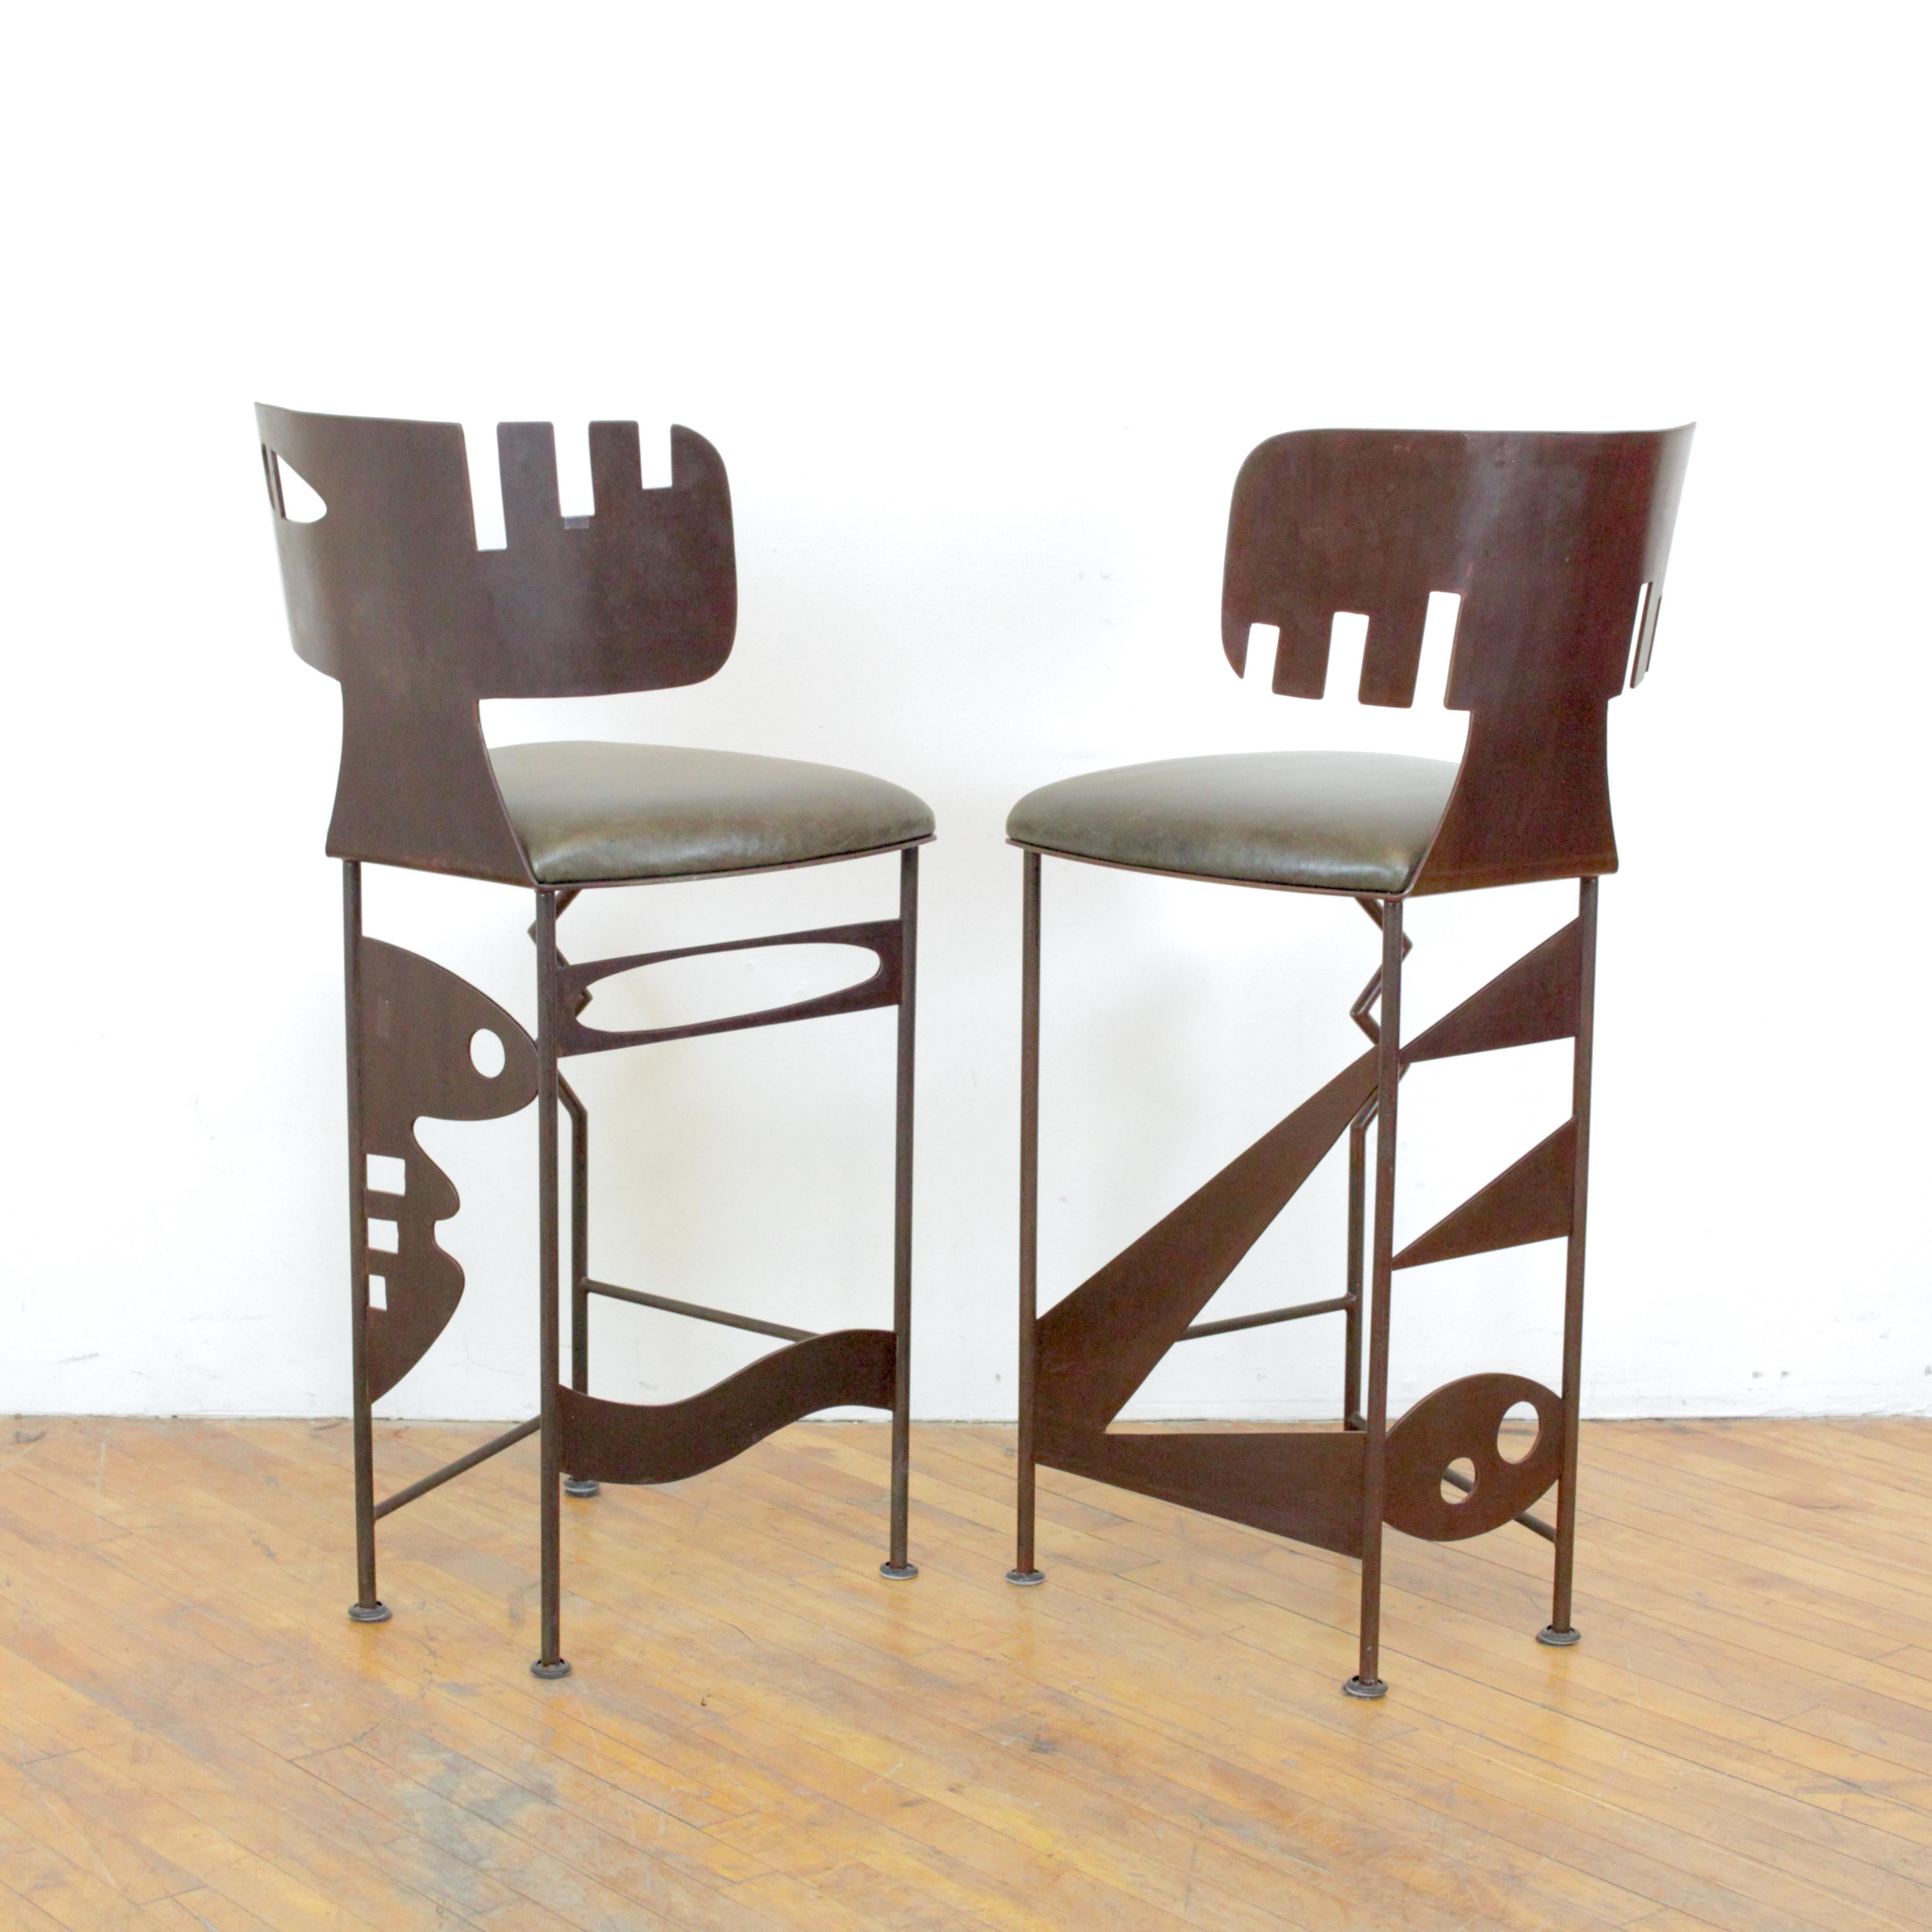 Late 20th Century Pair of Gregory Hawthorne Sculptural Stools For Sale